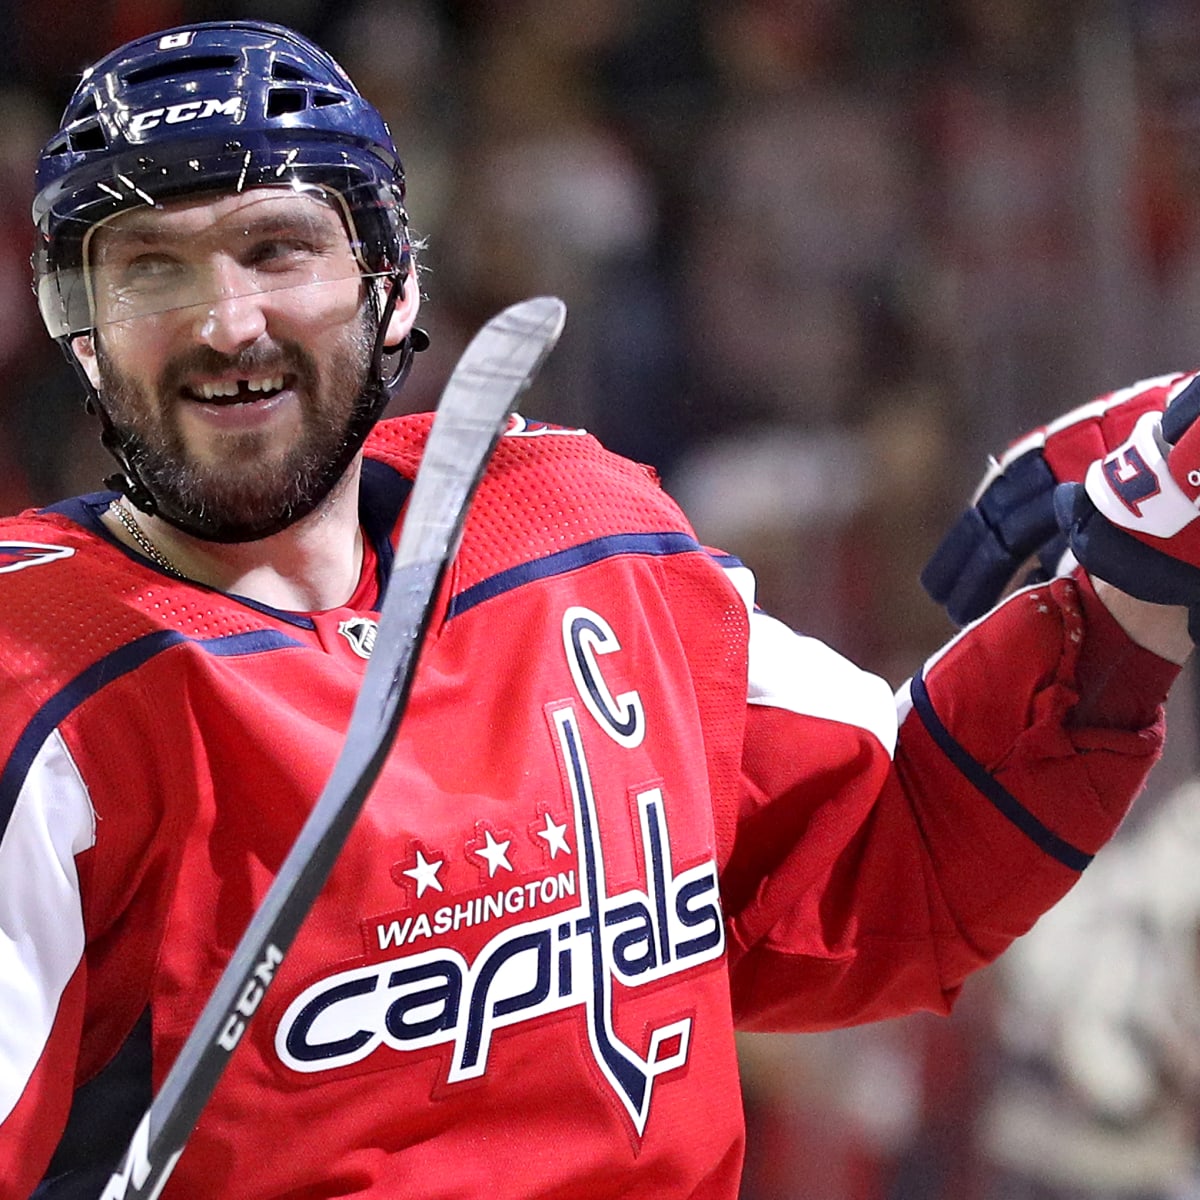 Ovechkin helps Capitals beat Bruins 4-3 in shootout